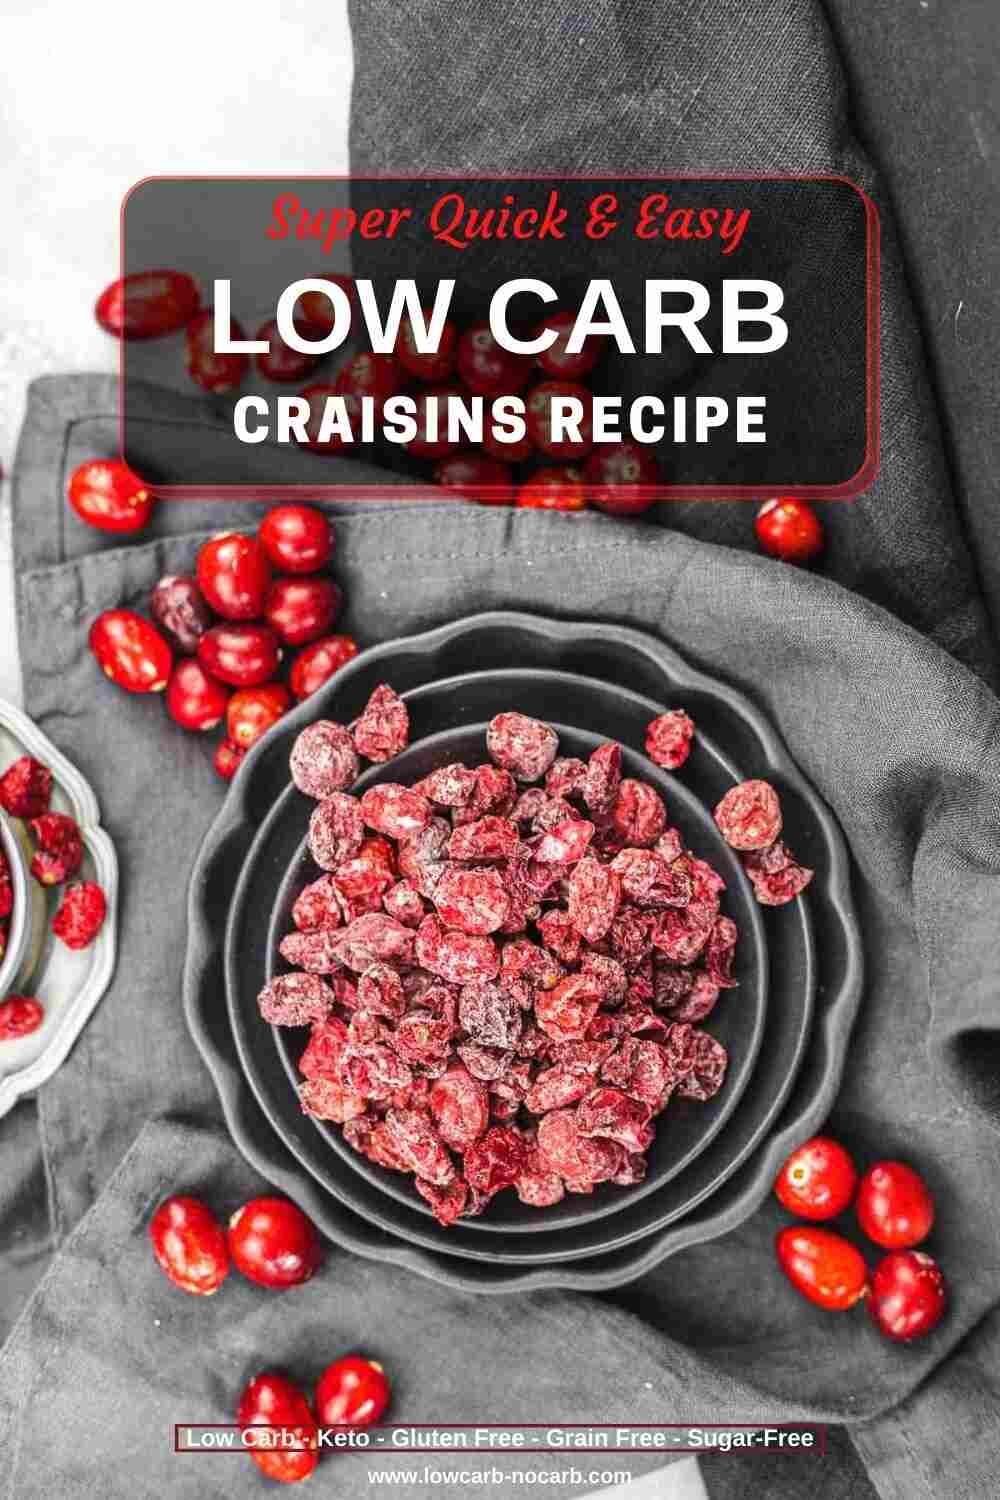 Low carb Craisins in a bowl.